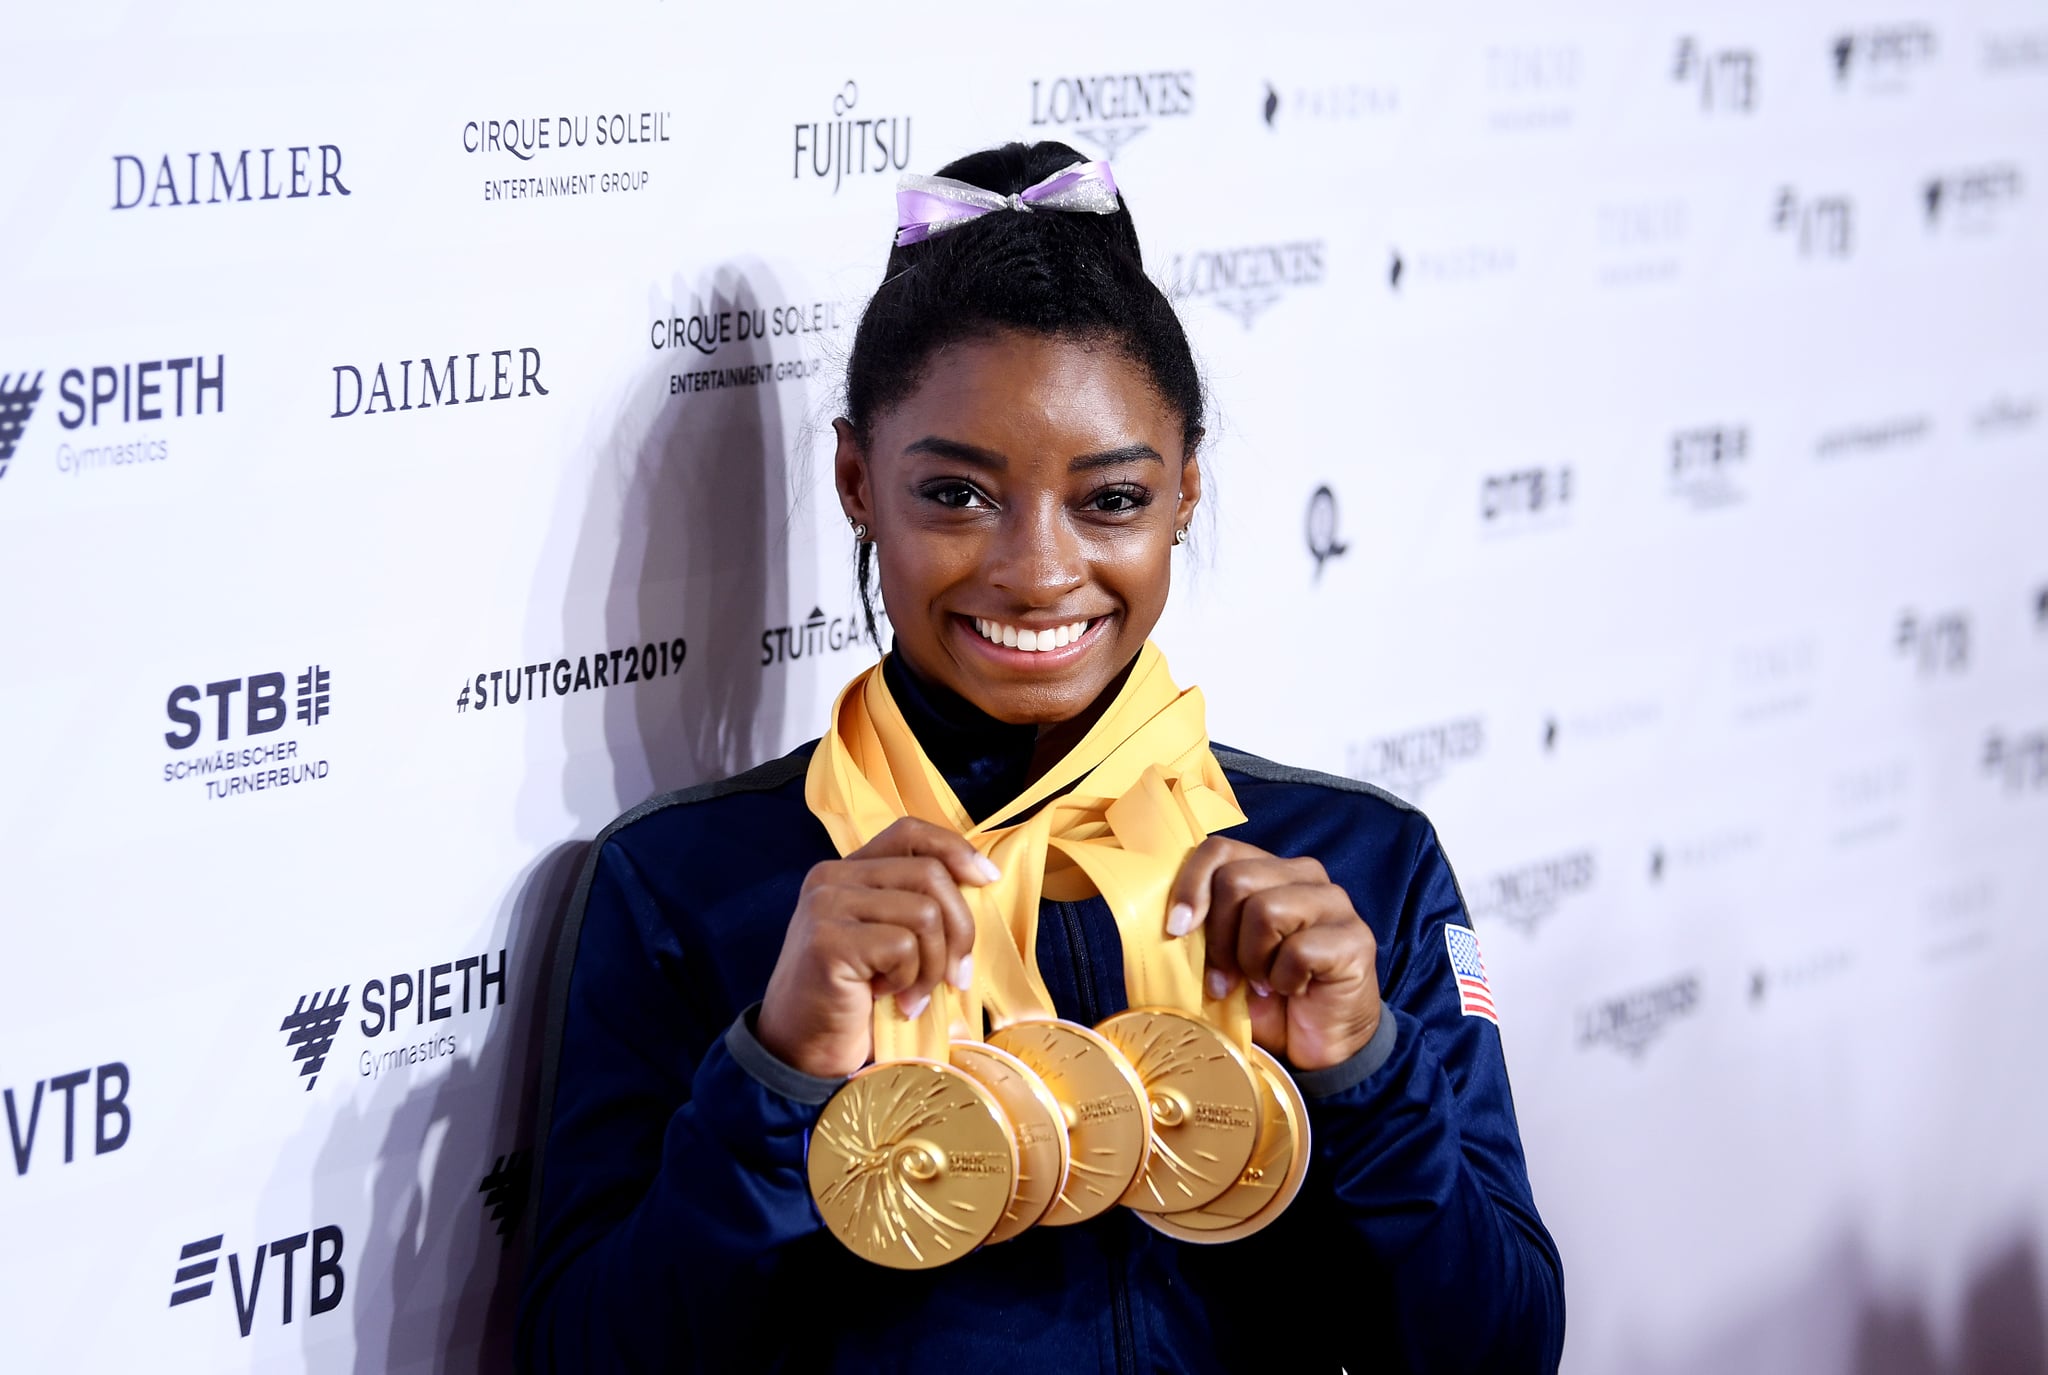 STUTTGART, GERMANY - OCTOBER 13: Simone Biles of The United States poses for photos with her multiple gold medals during day 10 of the 49th FIG Artistic Gymnastics World Championships at Hanns-Martin-Schleyer-Halle on October 13, 2019 in Stuttgart, Germany. (Photo by Laurence Griffiths/Getty Images)